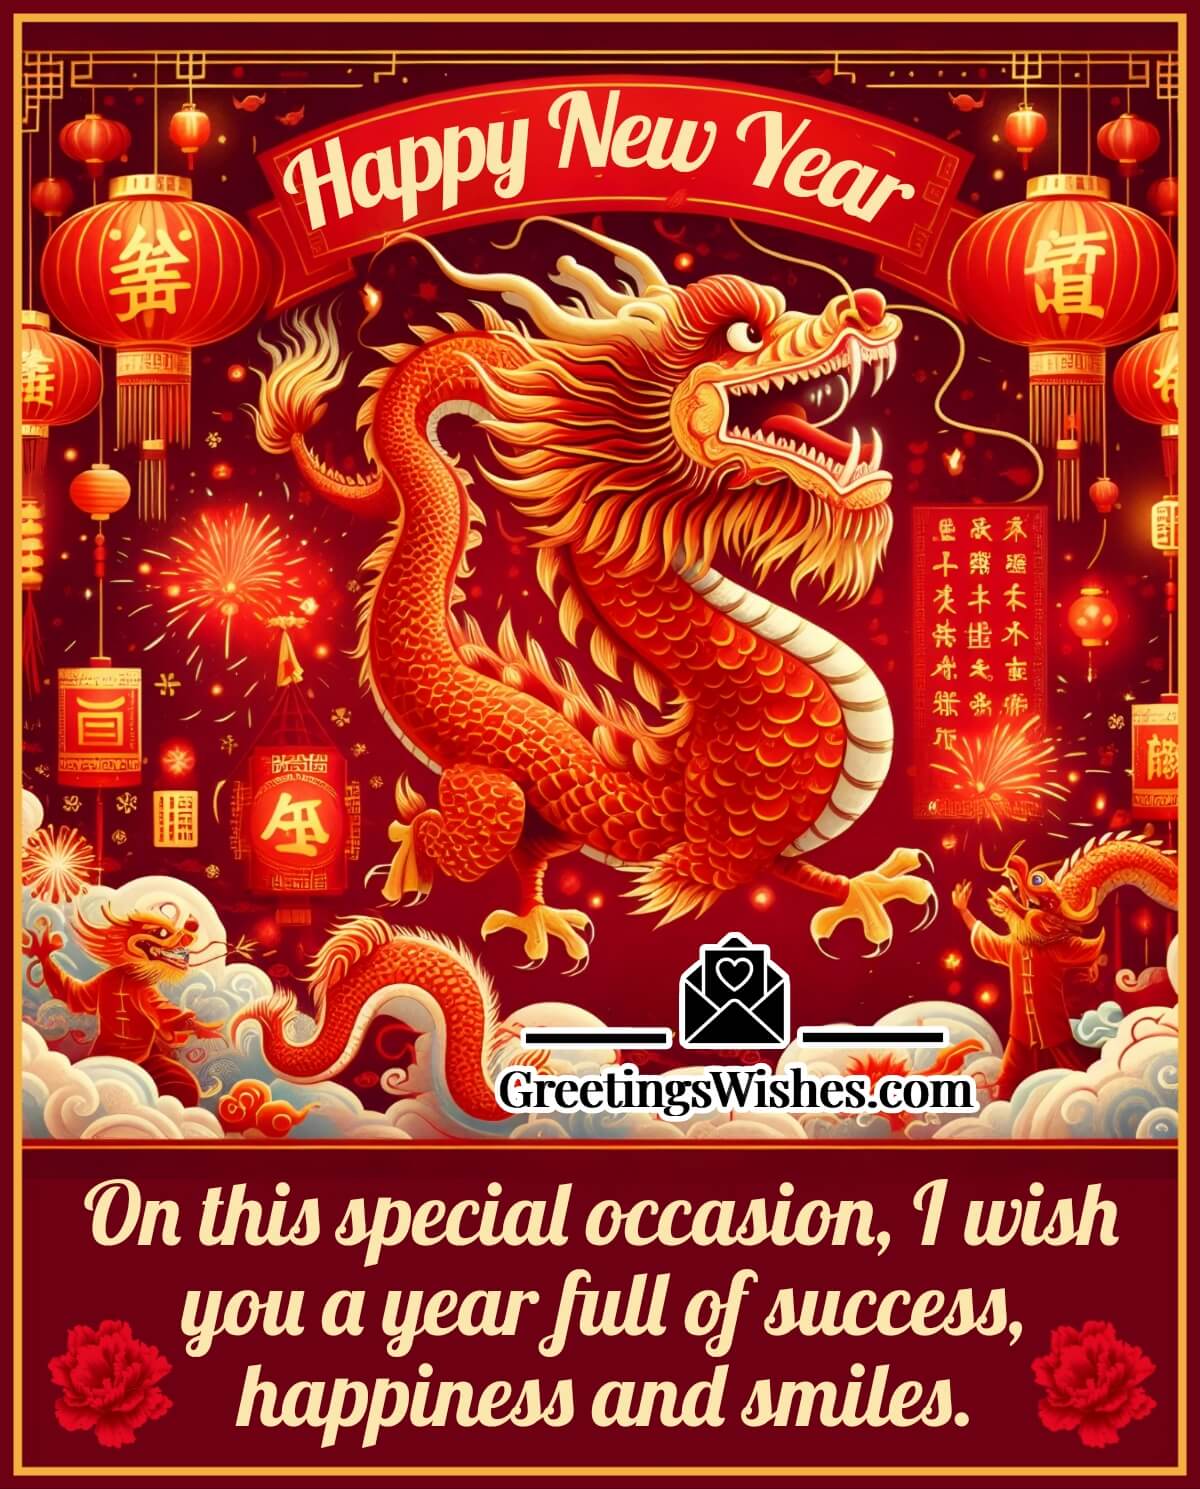 Happy Chinese New Year Wishes